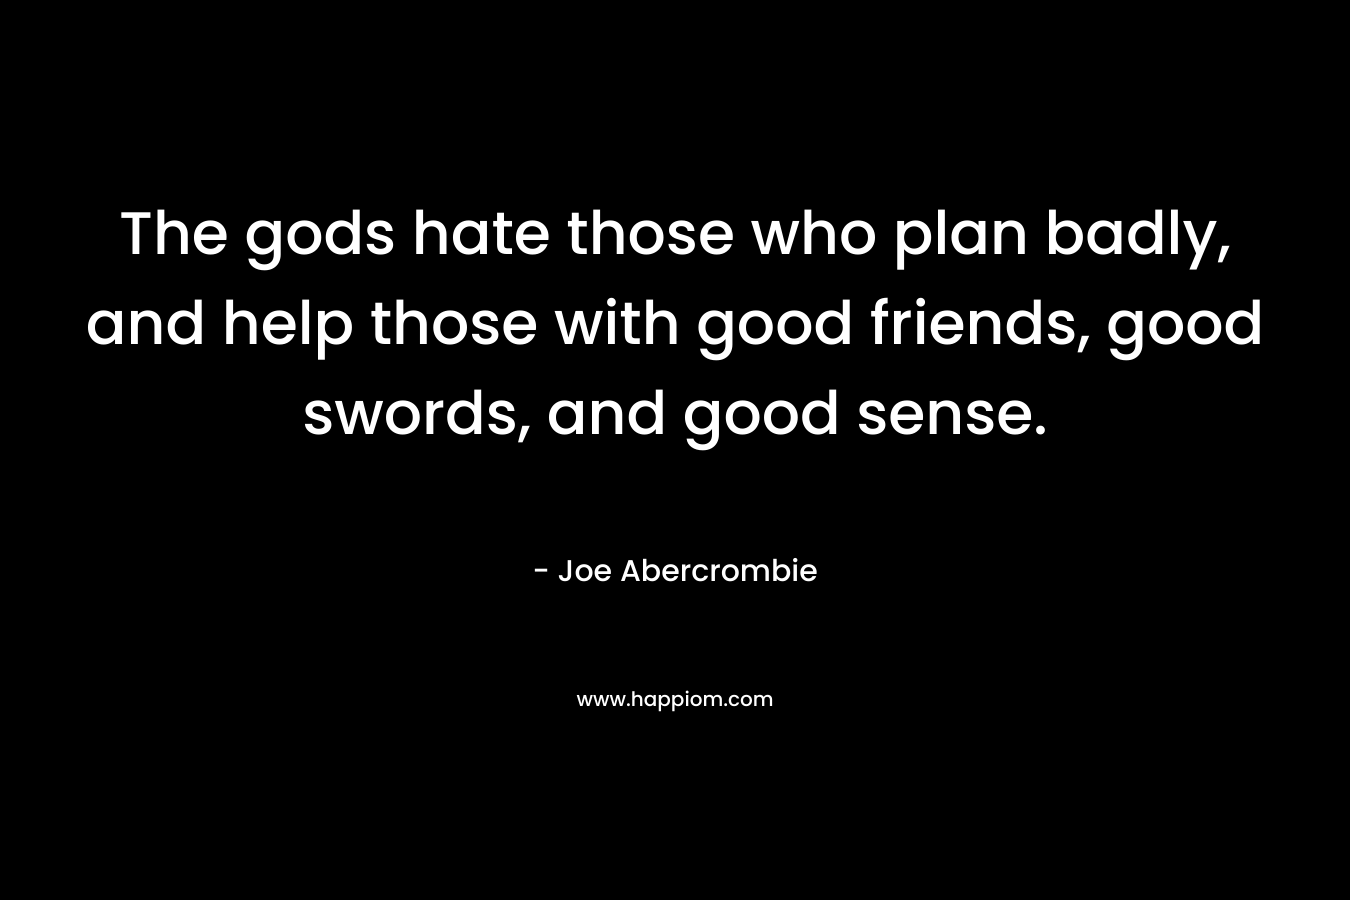 The gods hate those who plan badly, and help those with good friends, good swords, and good sense.